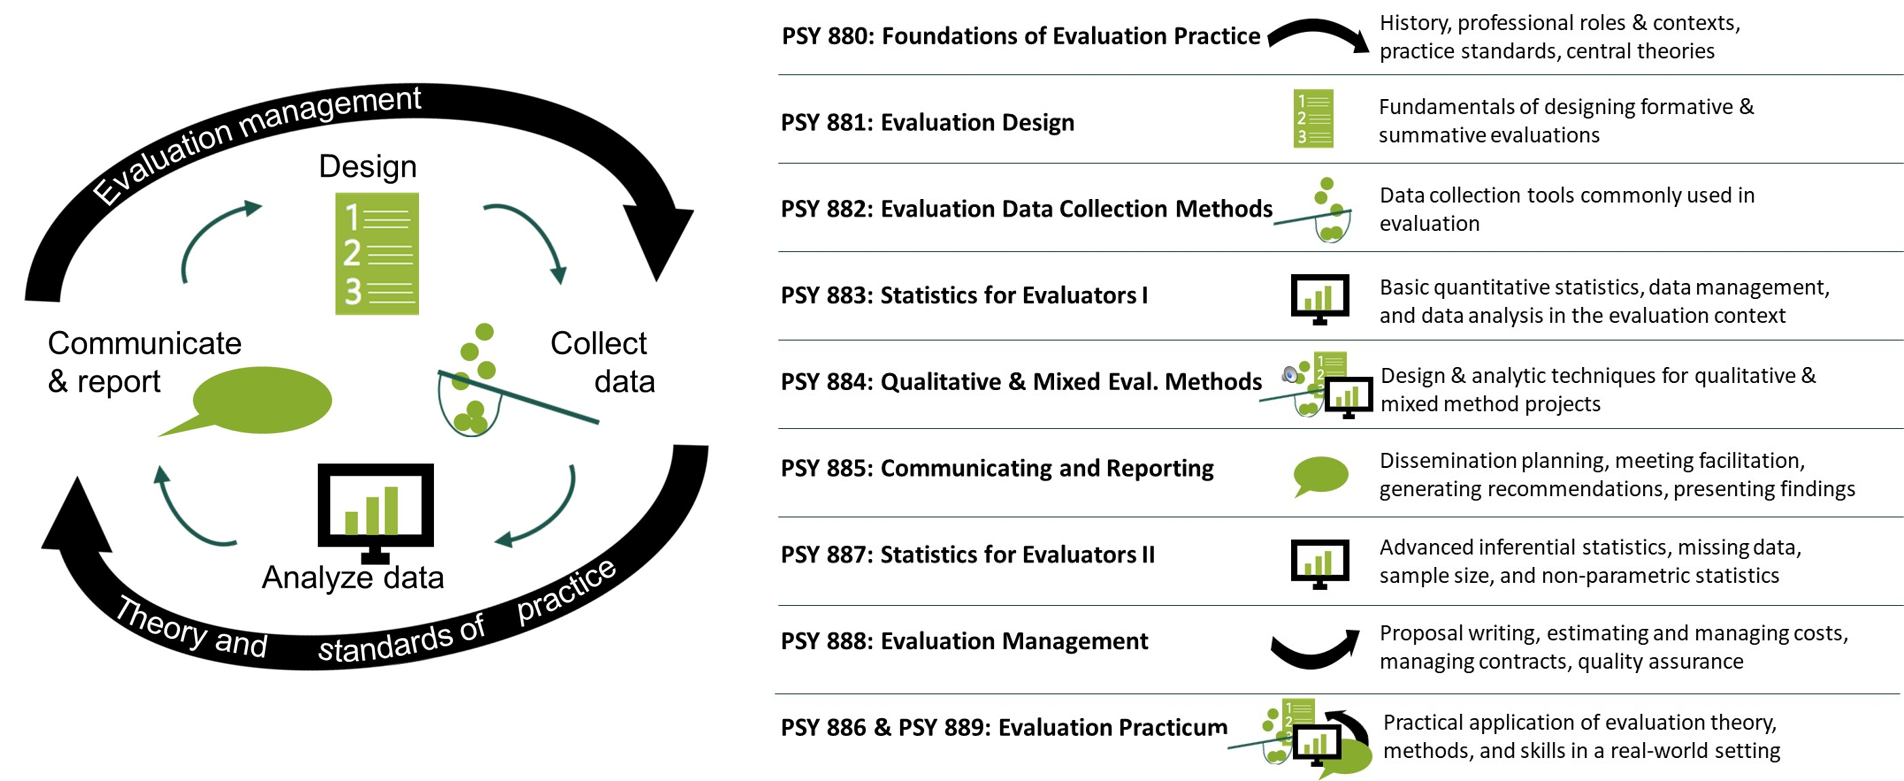 Courses cover evaluation theory, design, data collection, analysis, communication/reporting, and project management.